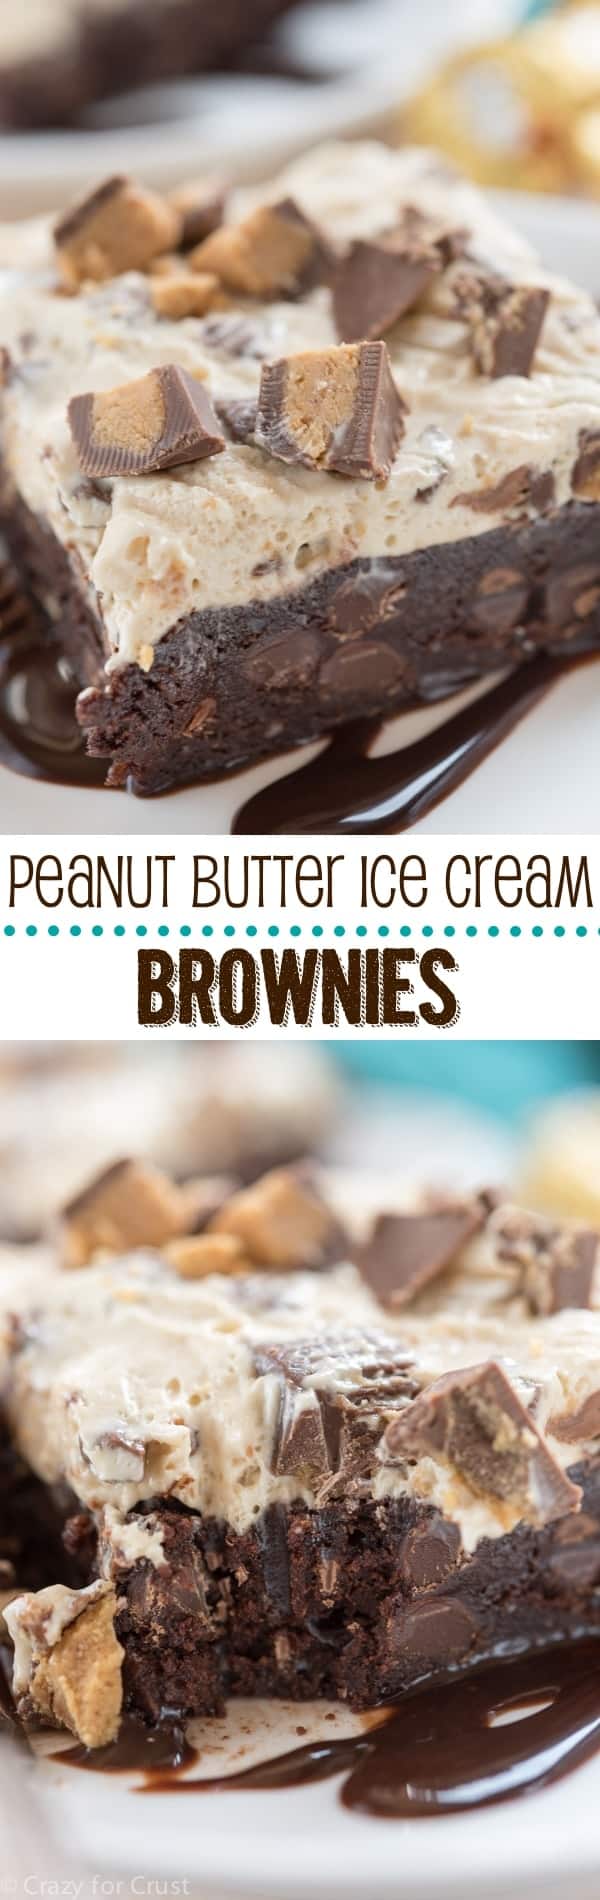 Peanut Butter Ice Cream Brownies - an easy one bowl brownie recipe topped with peanut butter ice cream!